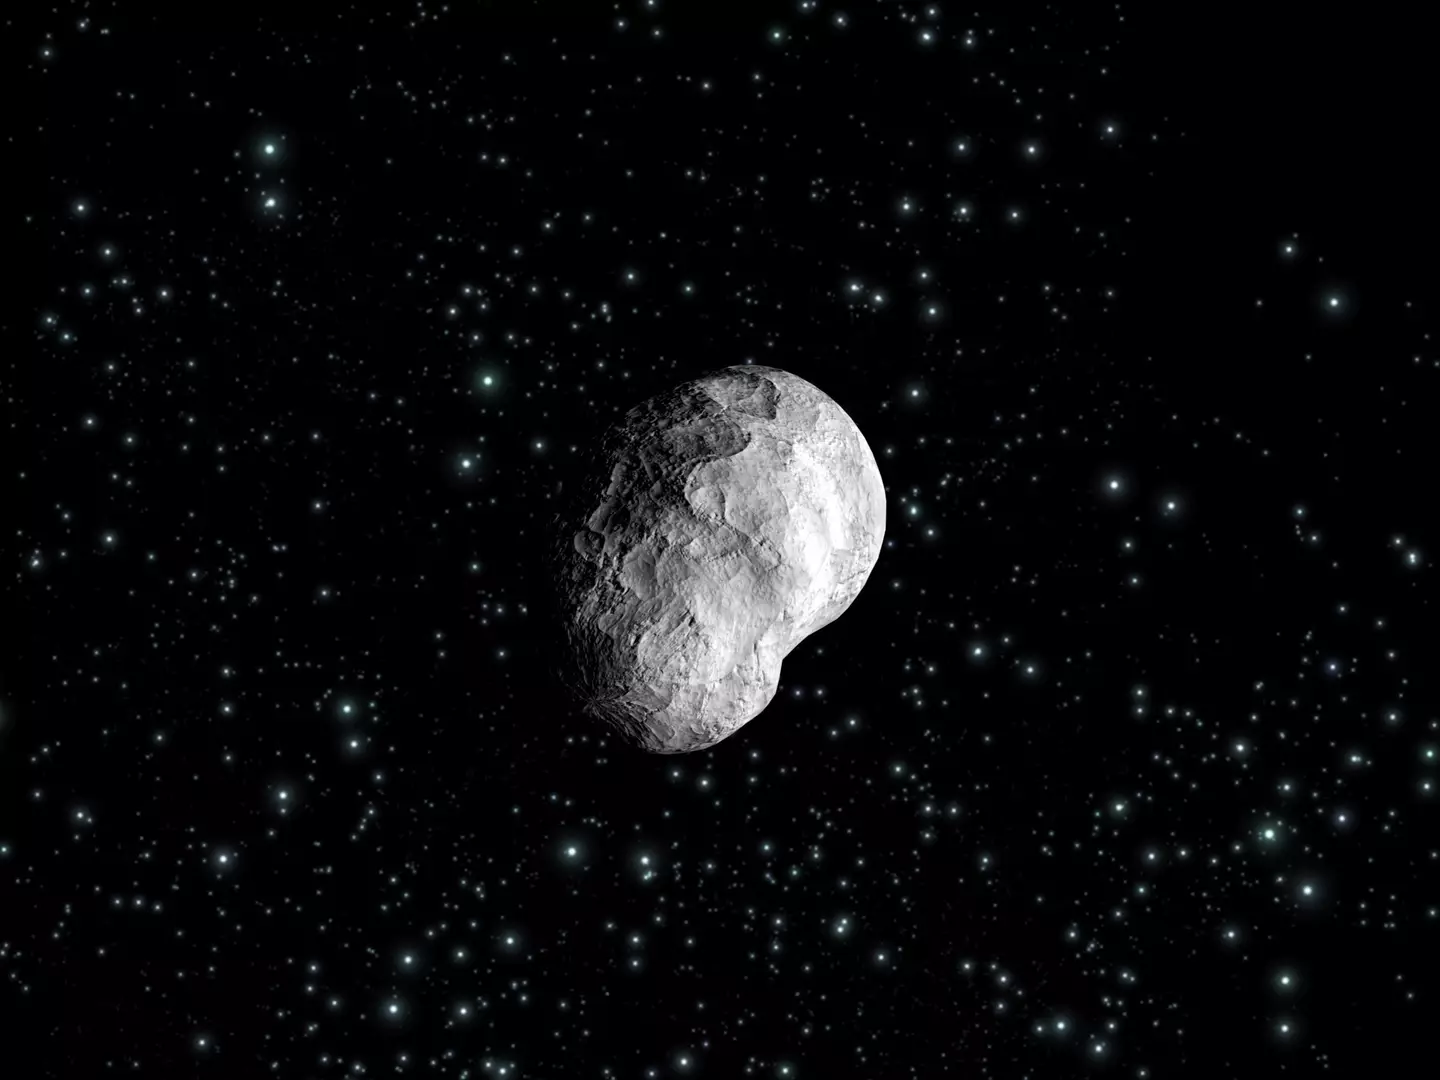 This isn't the asteroid, but asteroids do look like this.